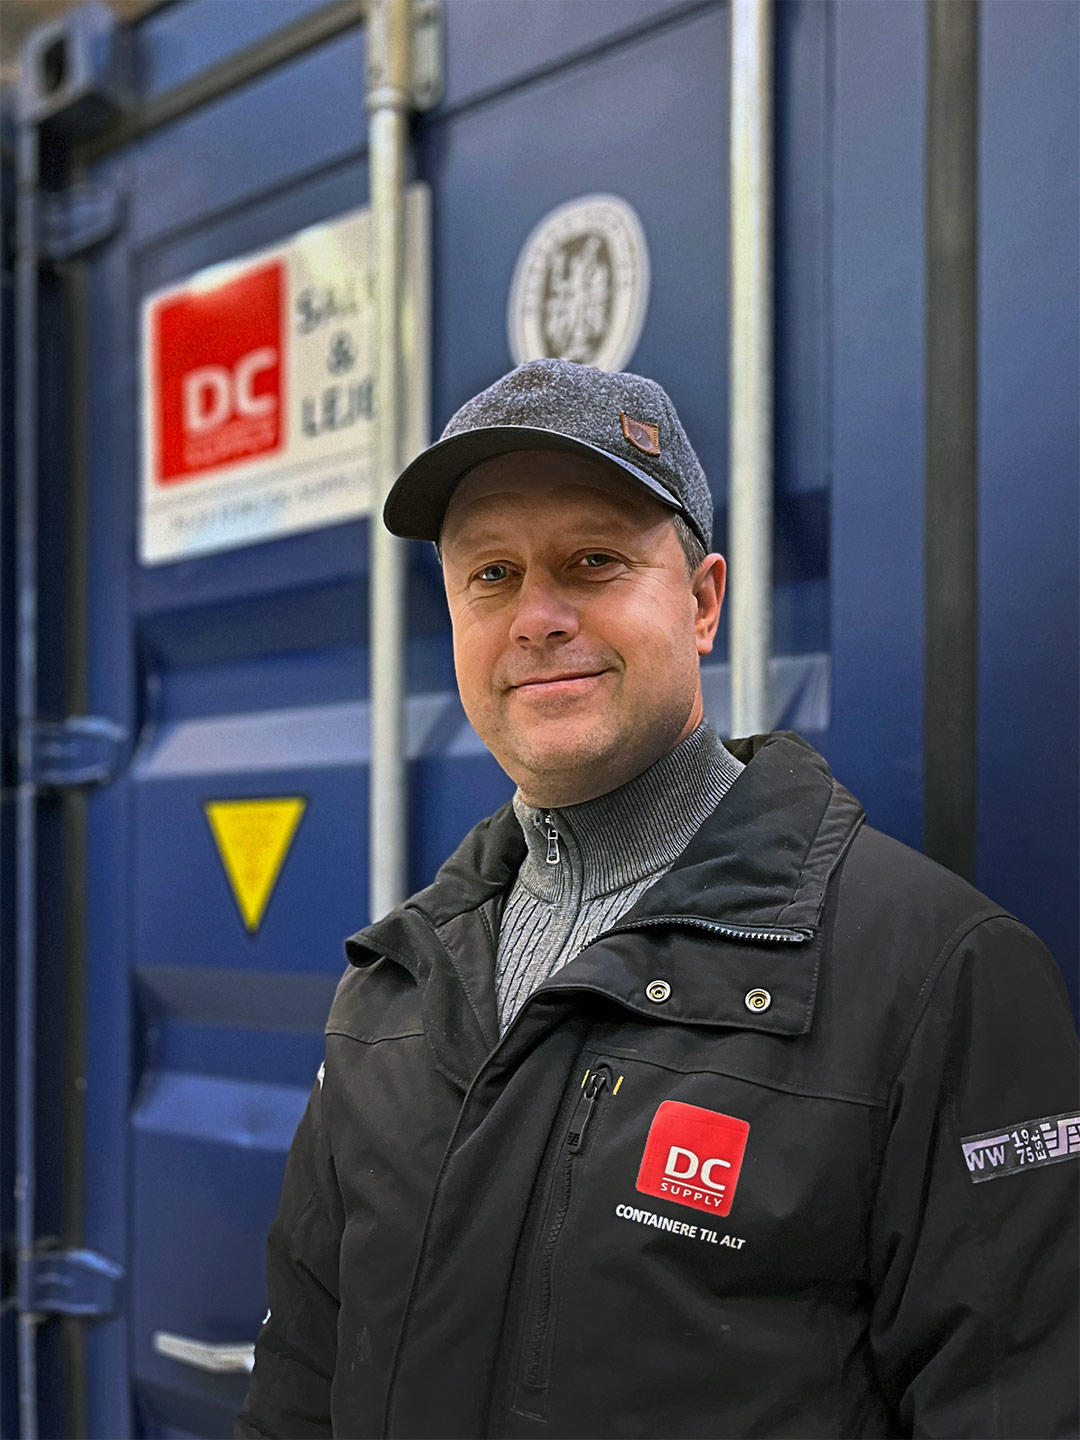 Nicolai Gundahl Sørensen advises on fire safety in containers at DC-Supply A/S